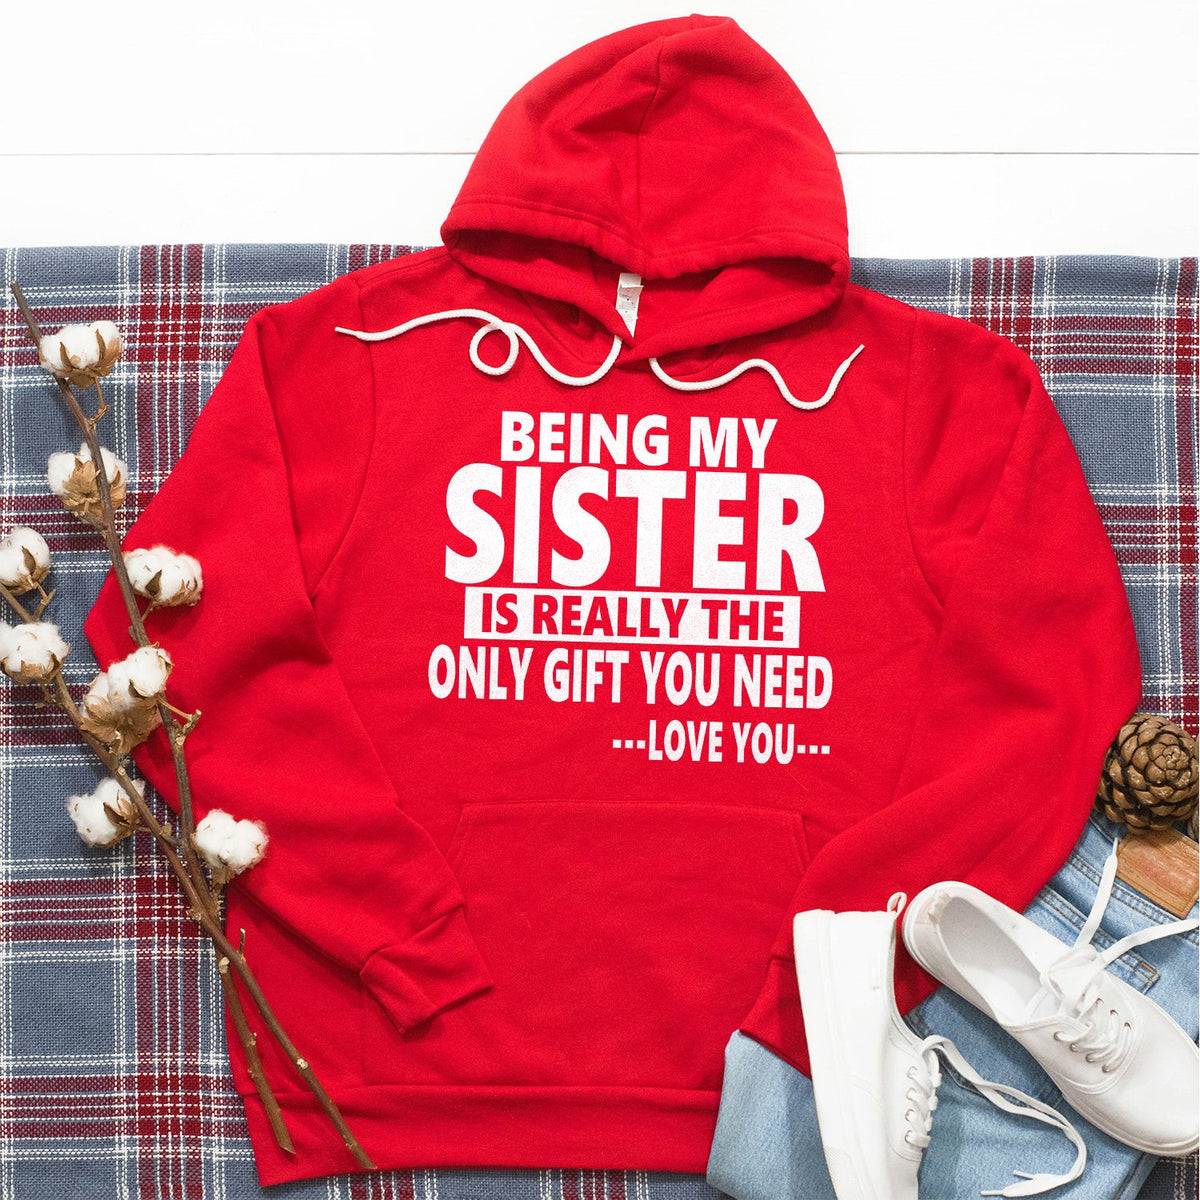 Being My Sister is Really The Only Gift You Need...Love You... - Hoodie Sweatshirt